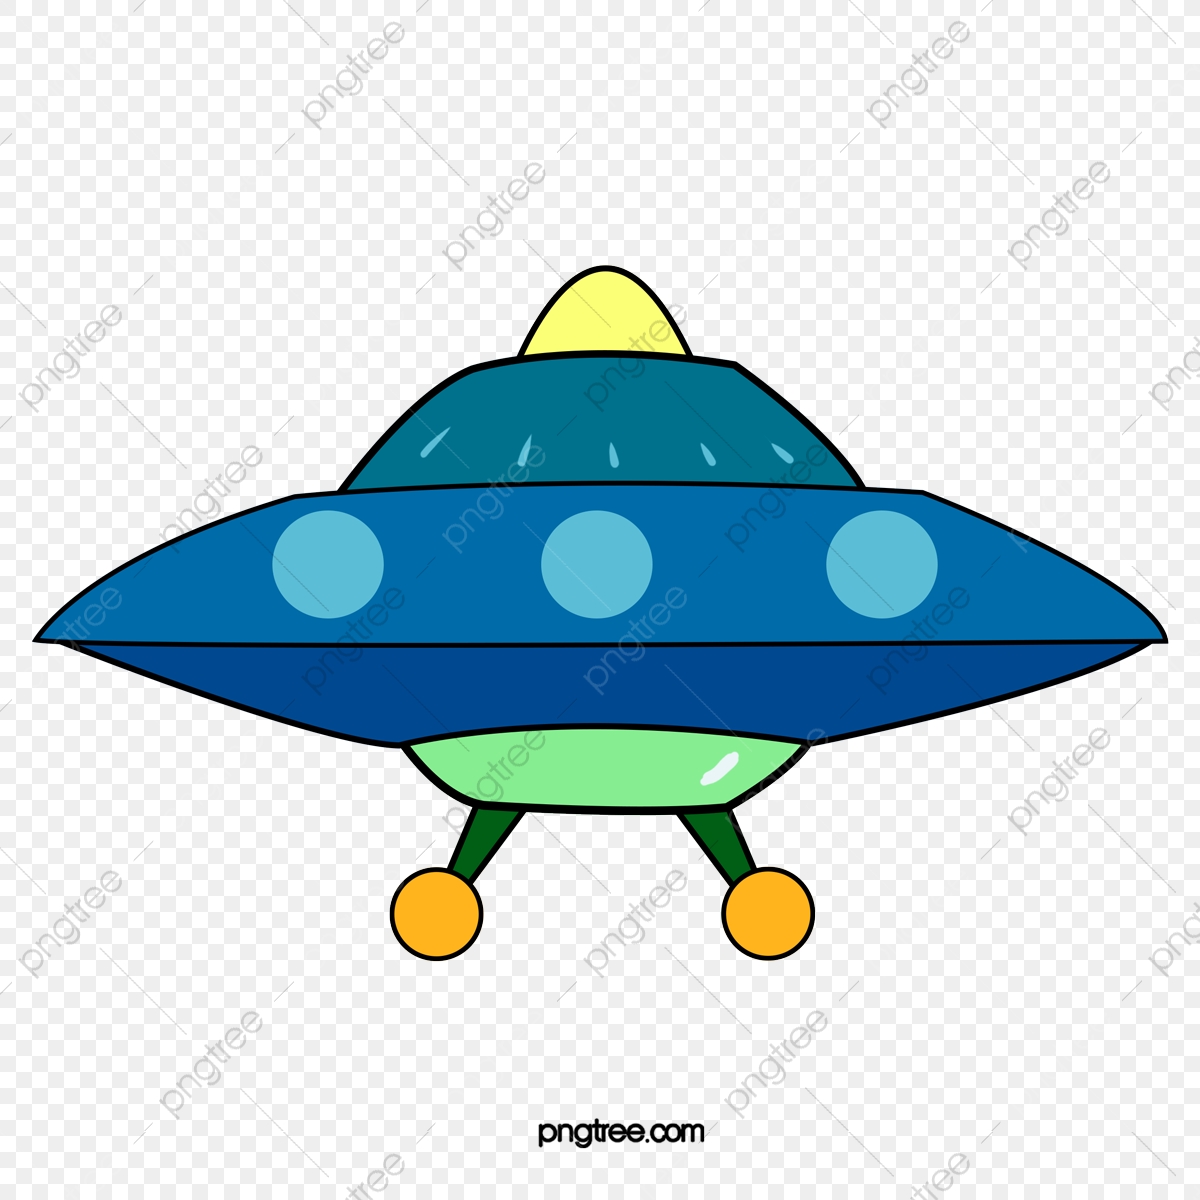 galaxy fighters clipart